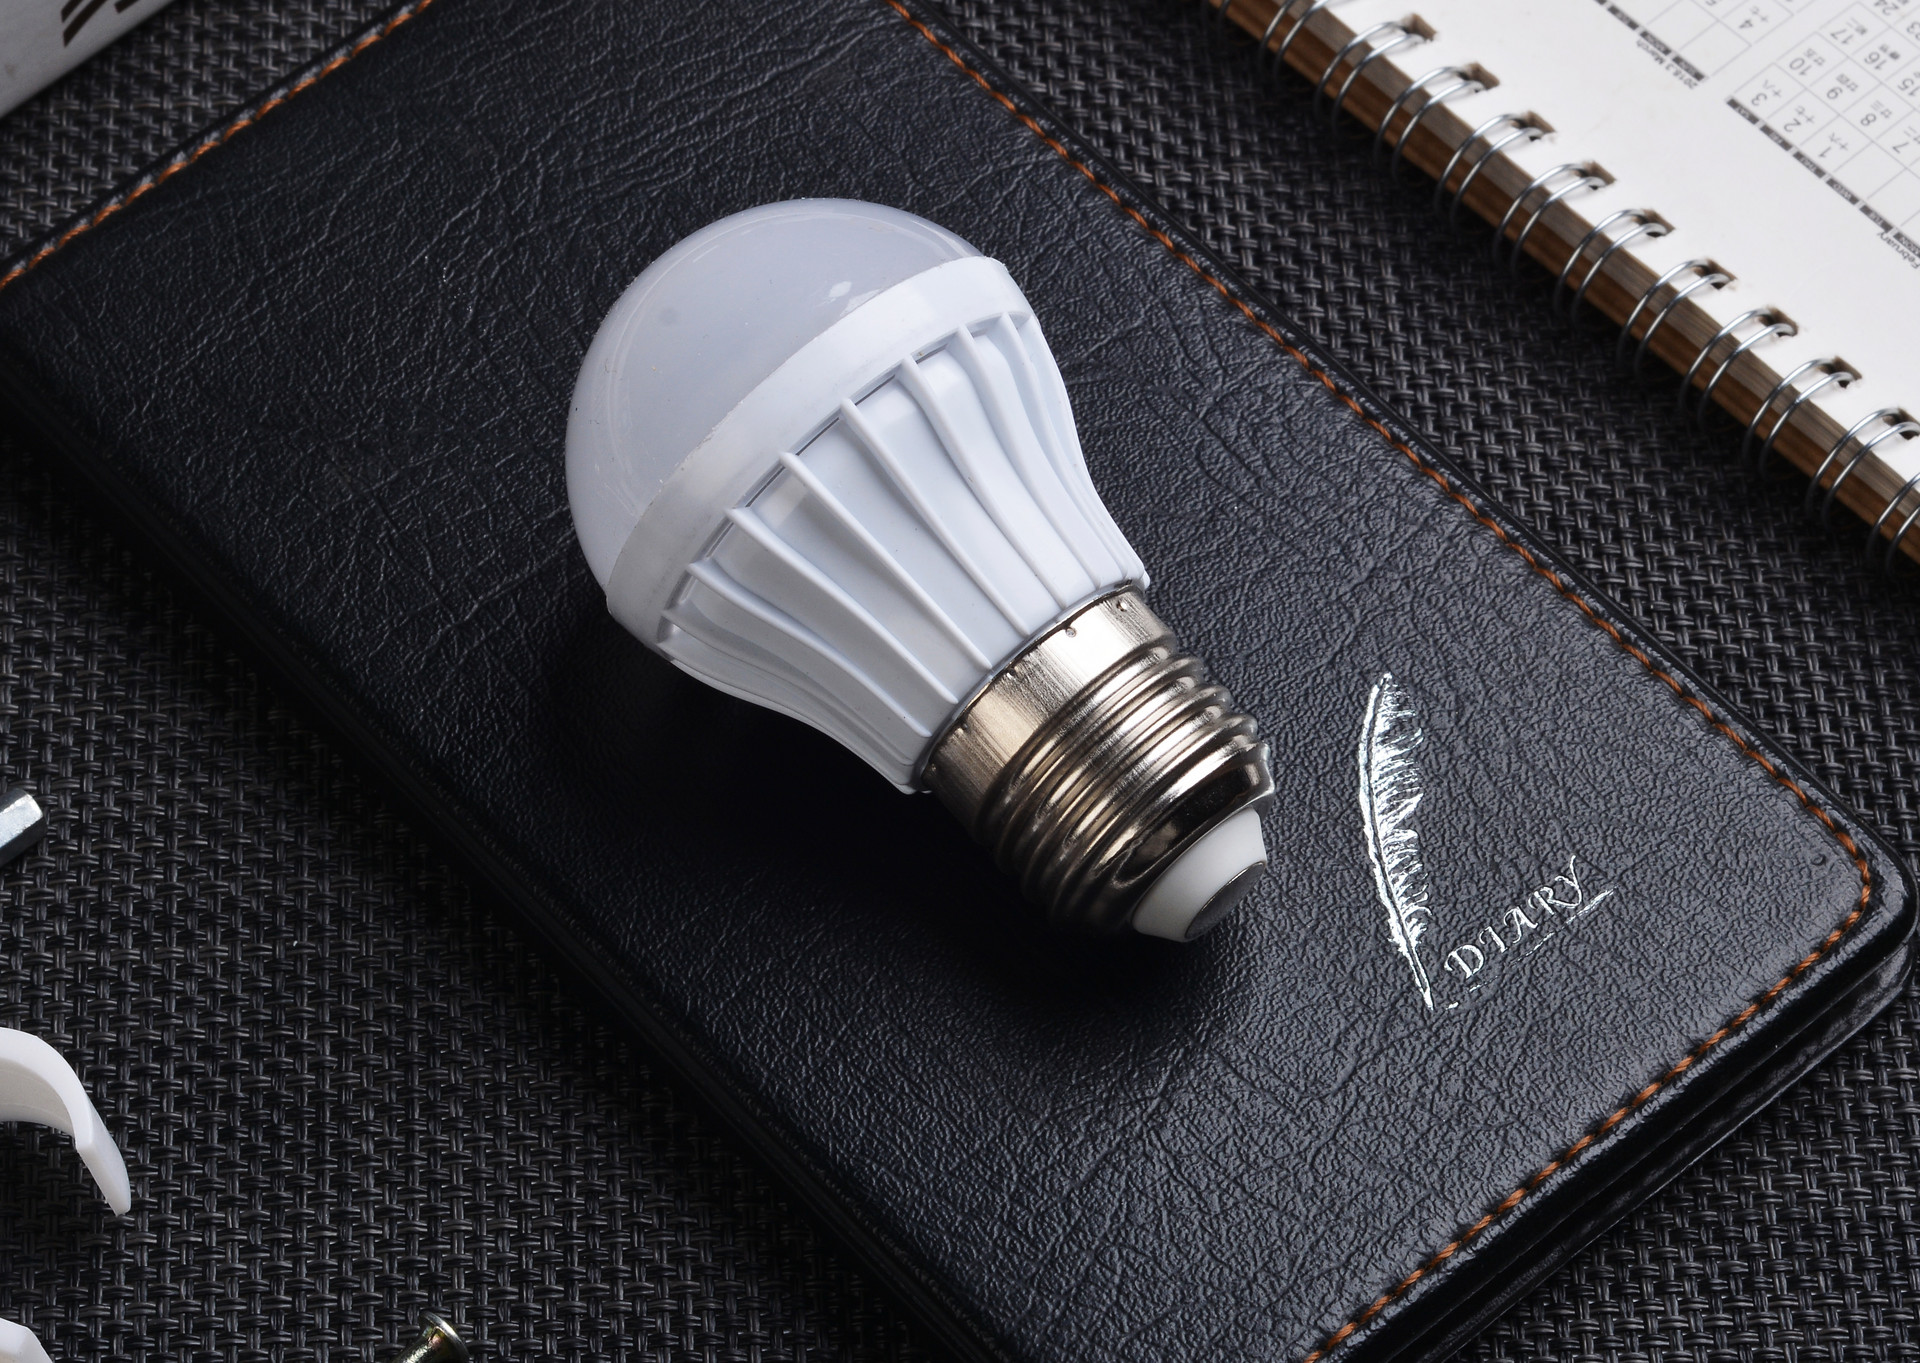 Advantages and Shopping Tips of LED Bulbs